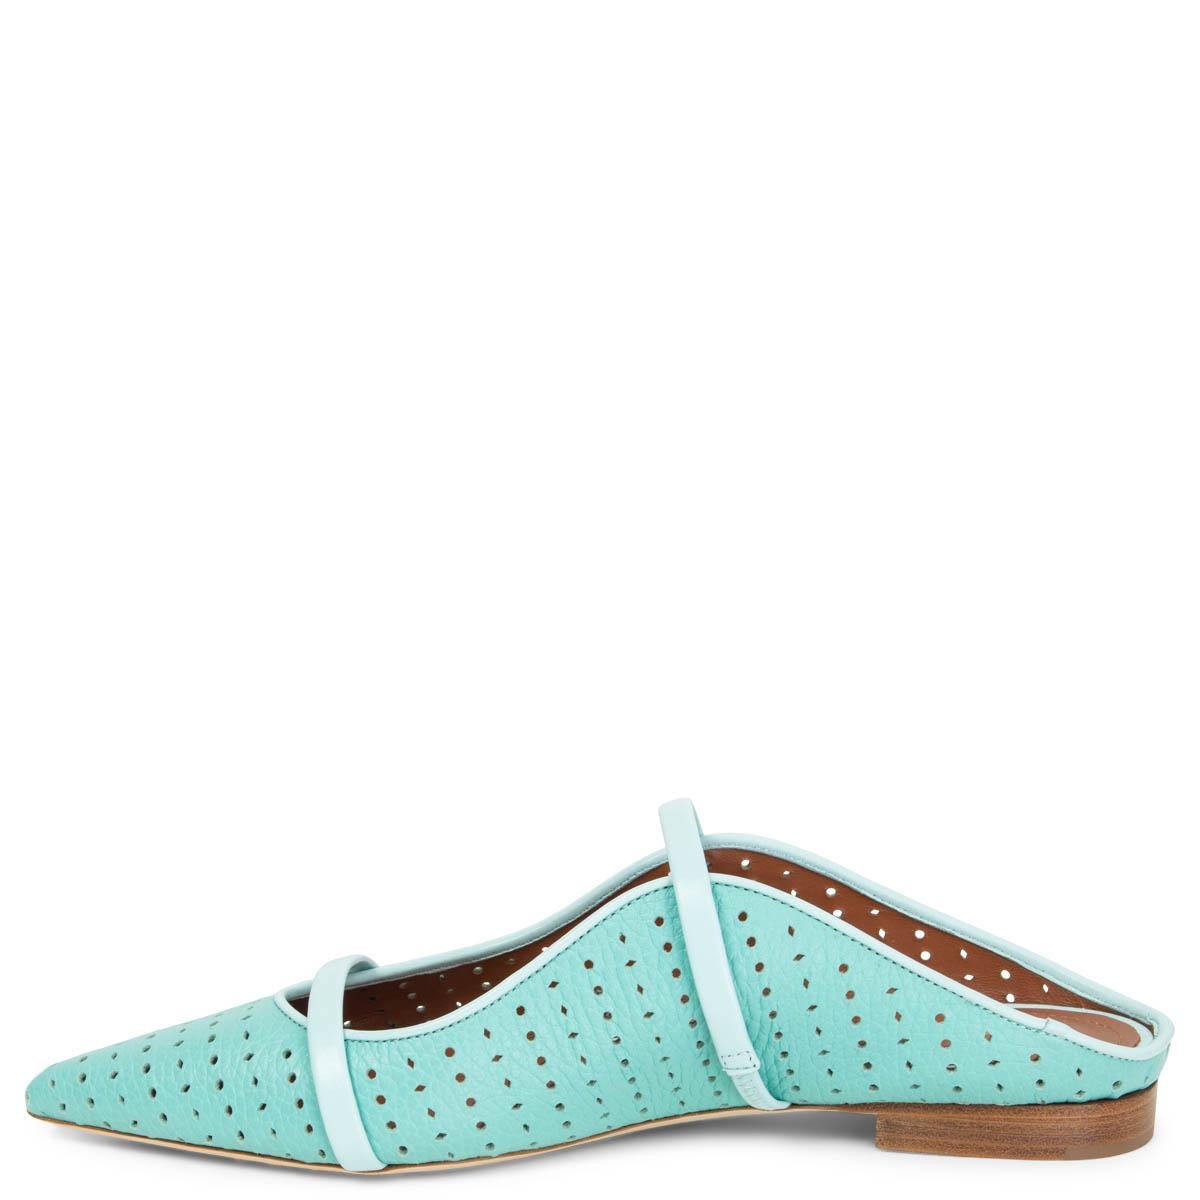 turquoise flat shoes